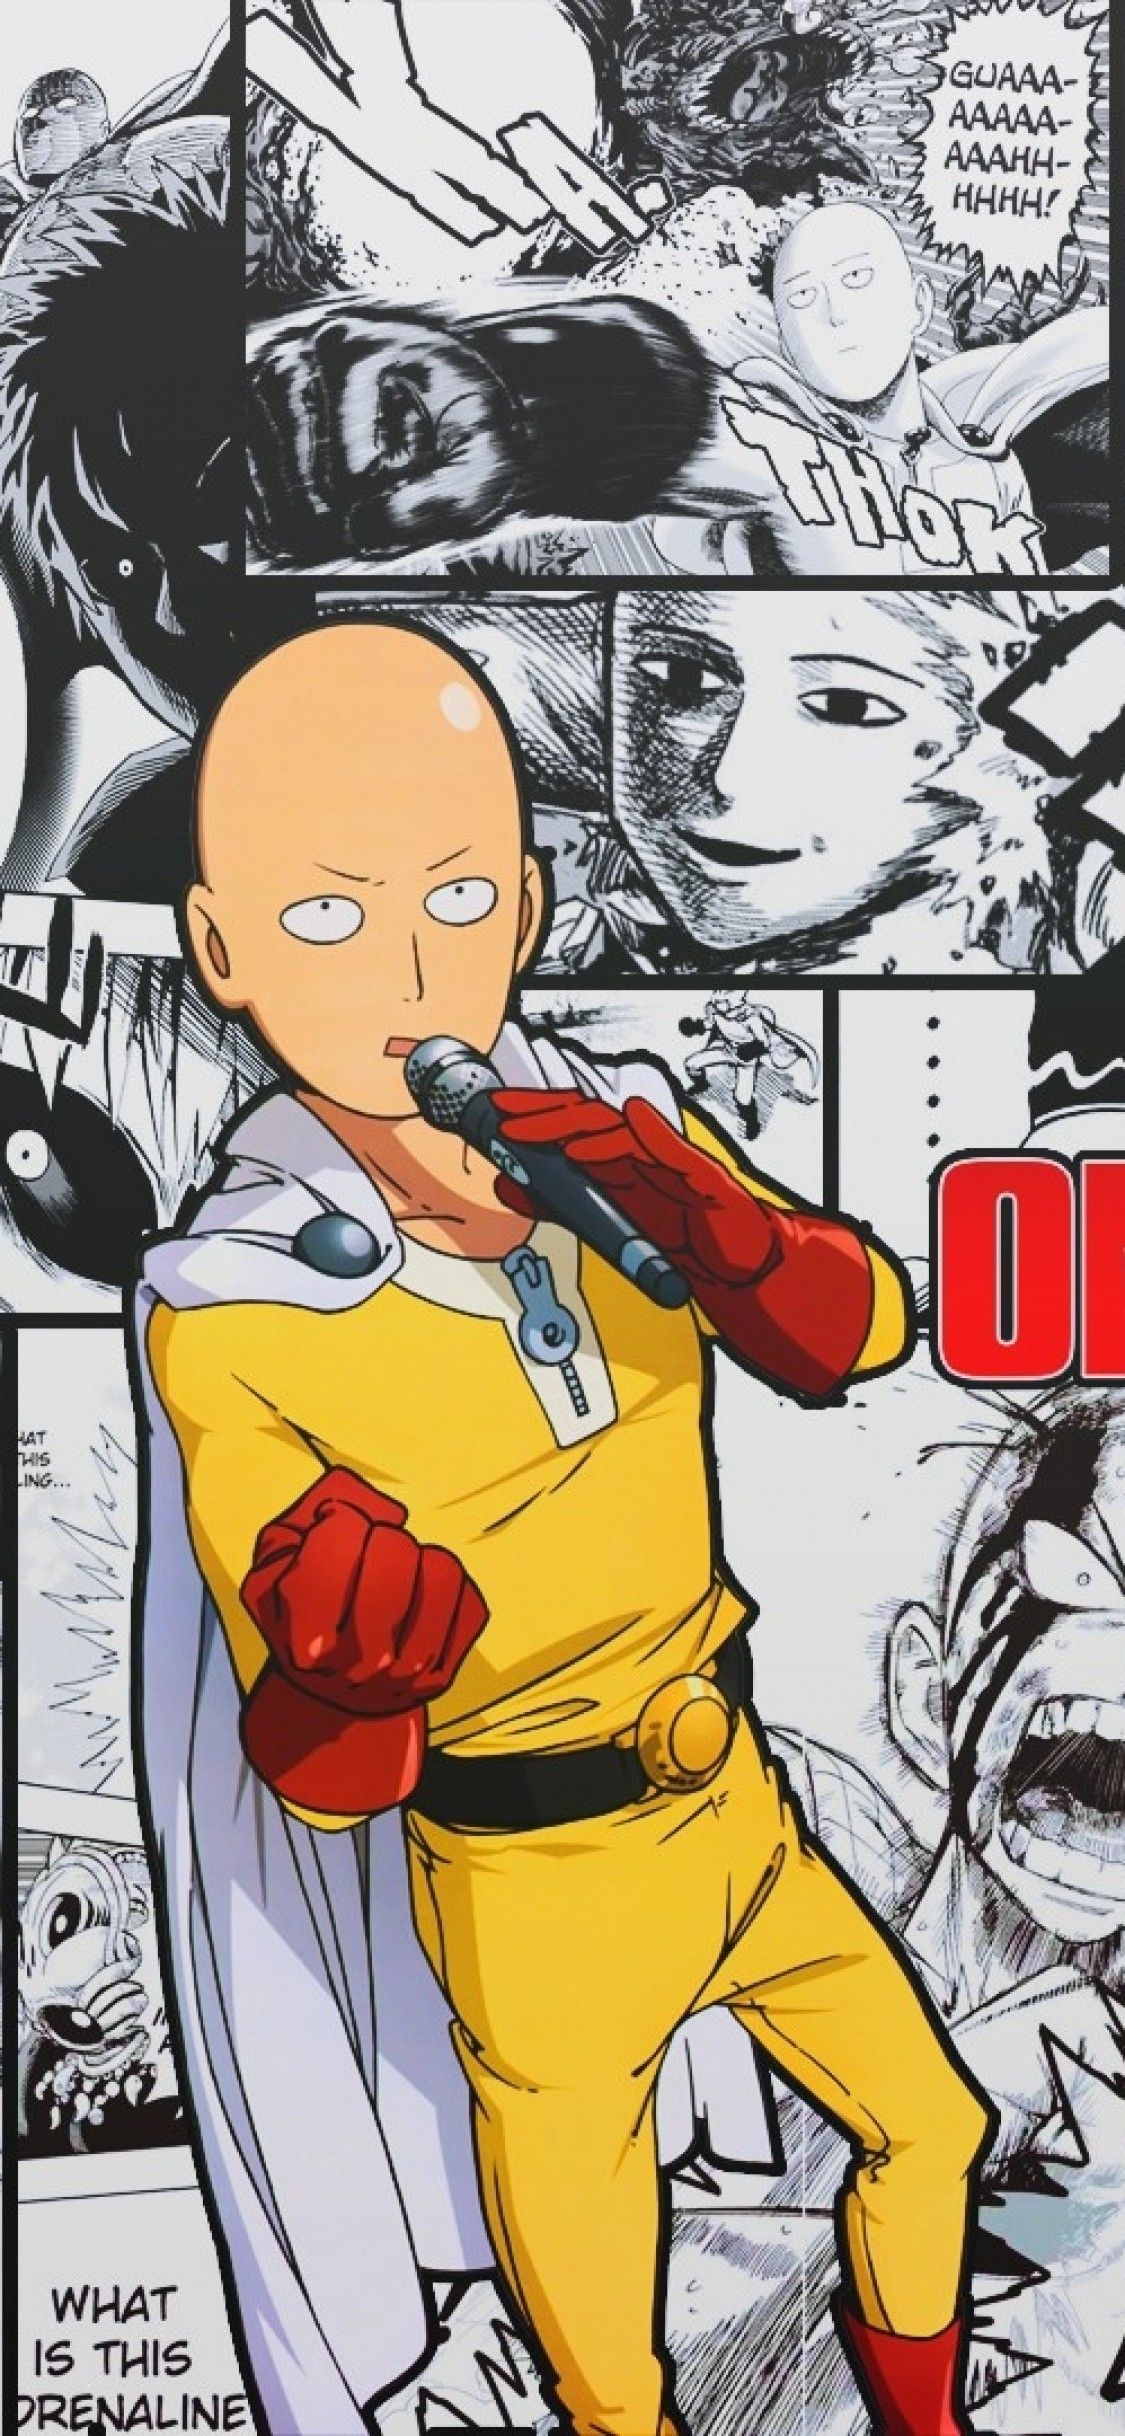 iPhone One Punch Man Wallpaper - KoLPaPer - Awesome Free HD Wallpapers